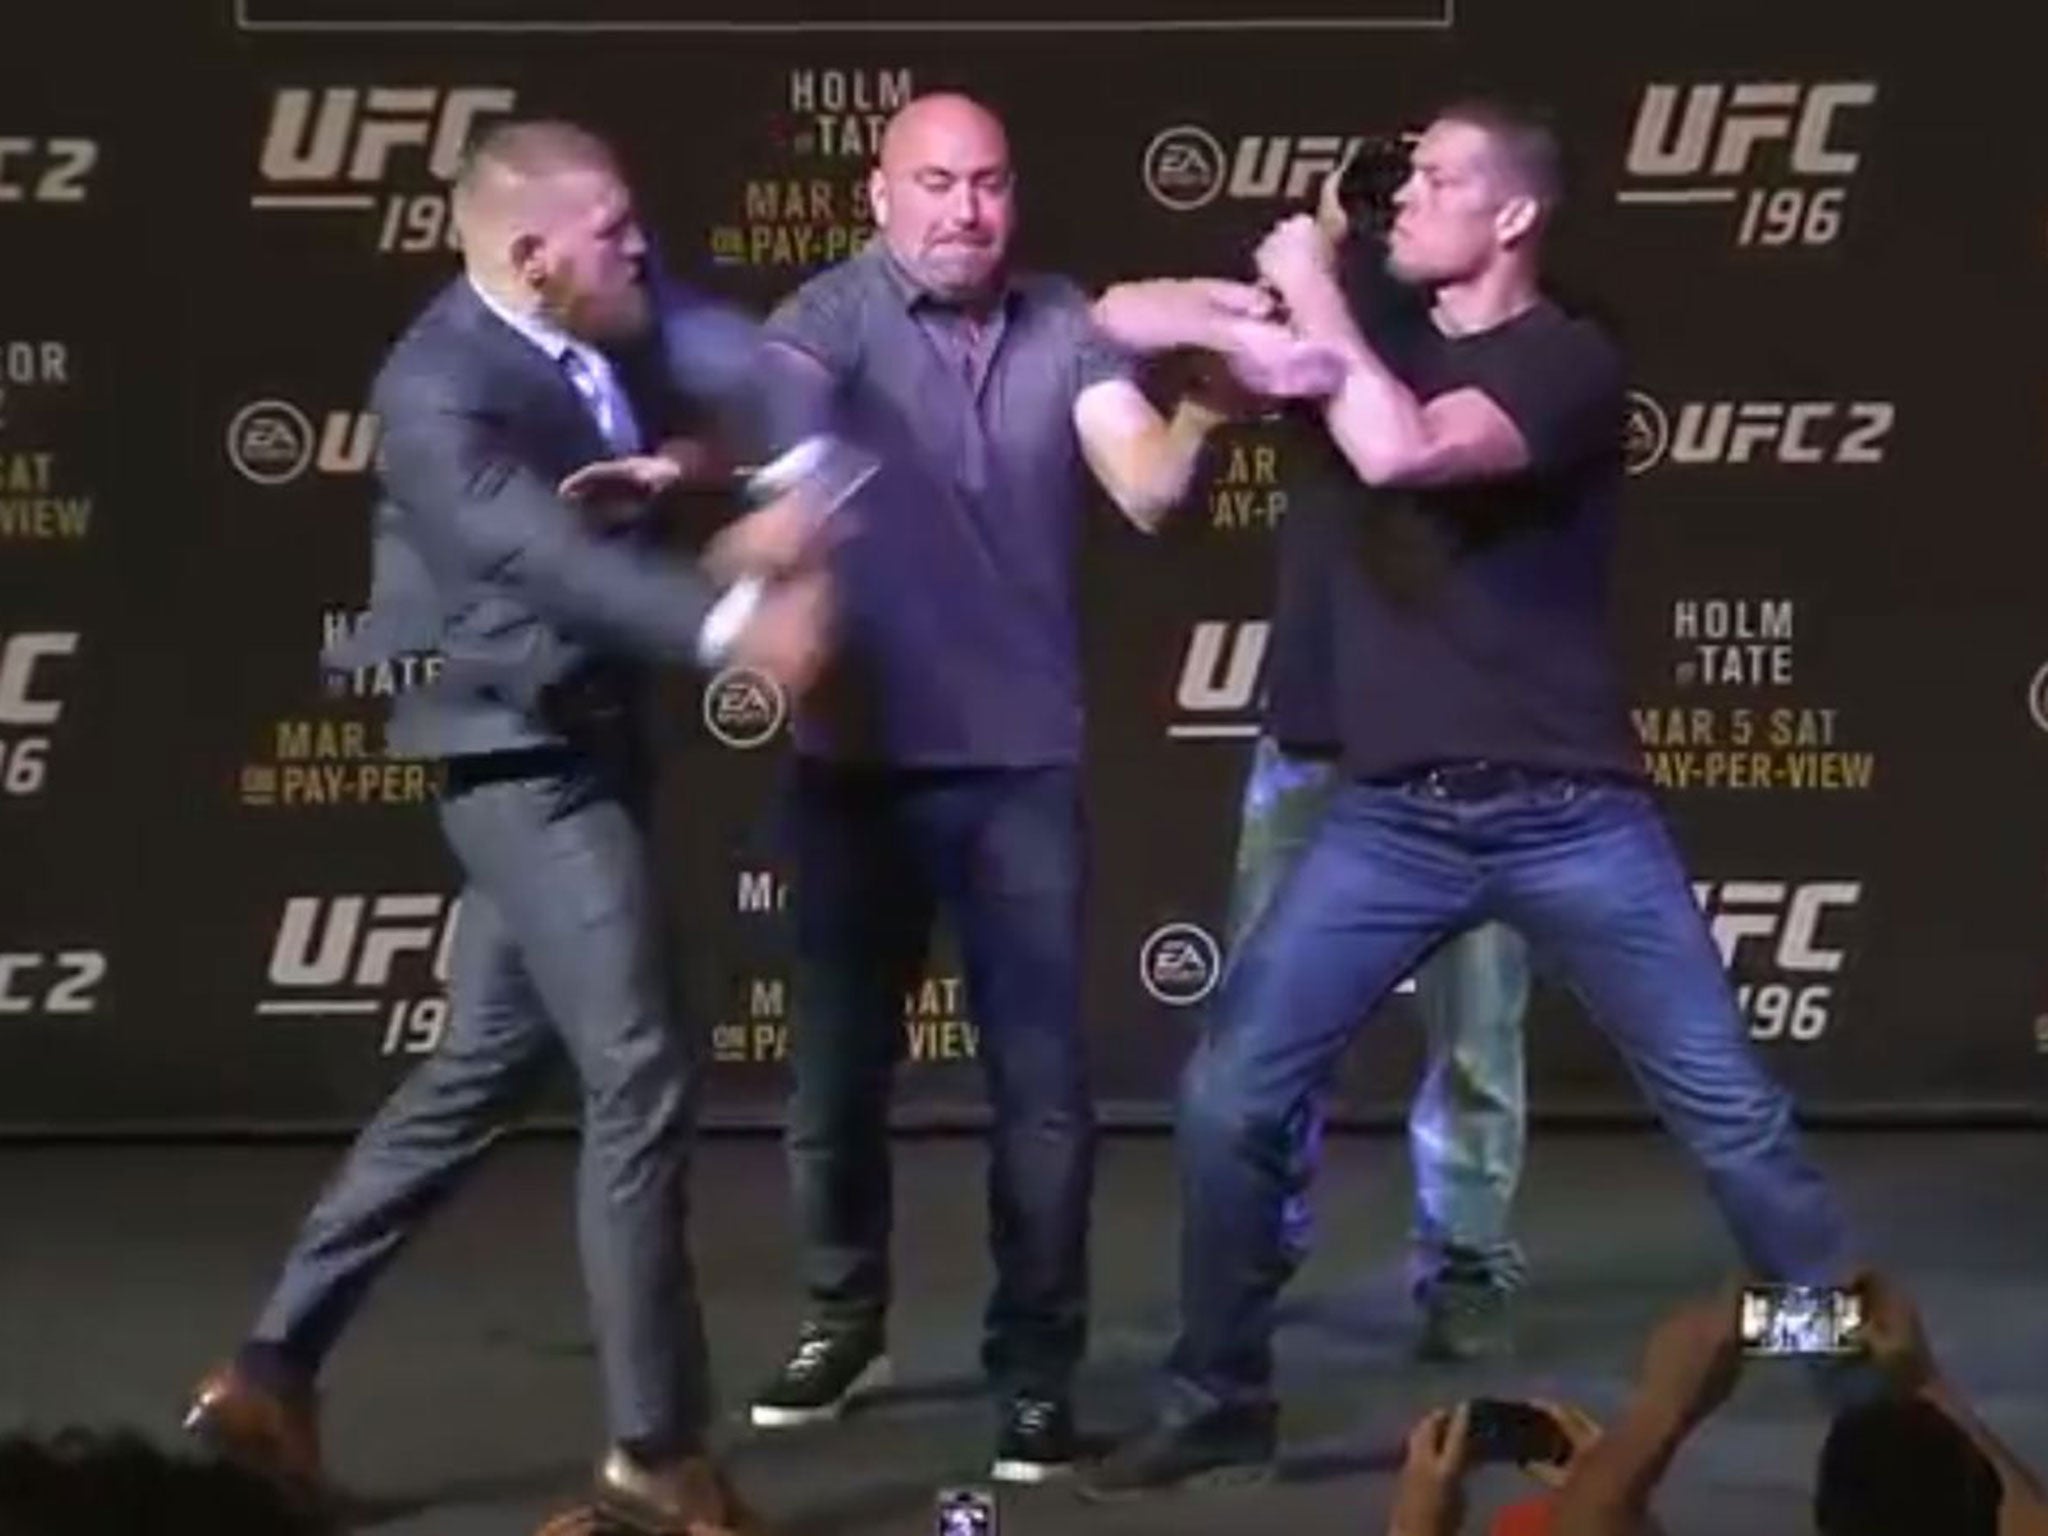 Conor McGregor and Nate Diaz are separated by UFC president Dana White